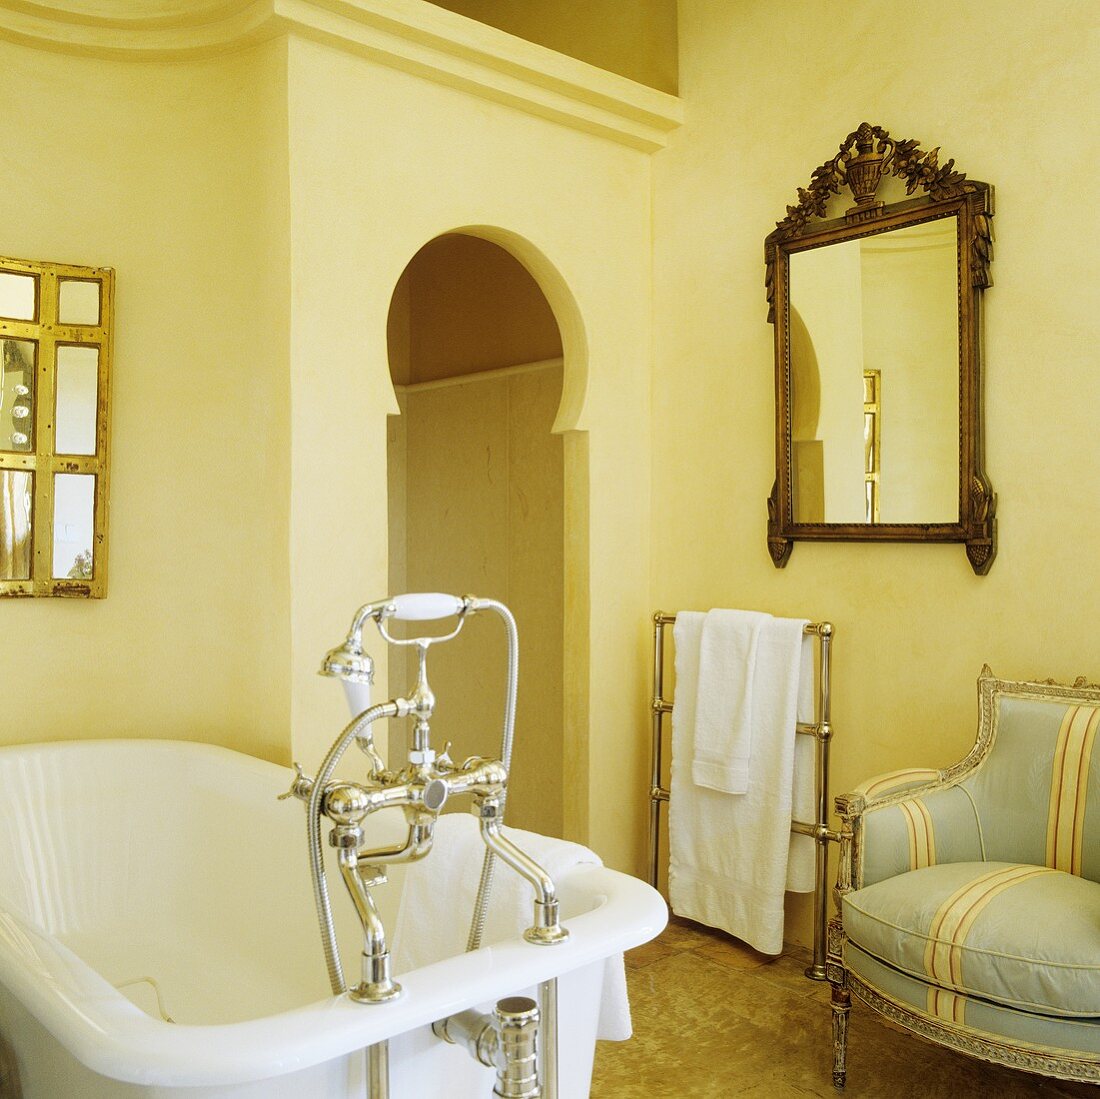 A bathtub with antique taps in front of a false front with an Oriental-style door opening